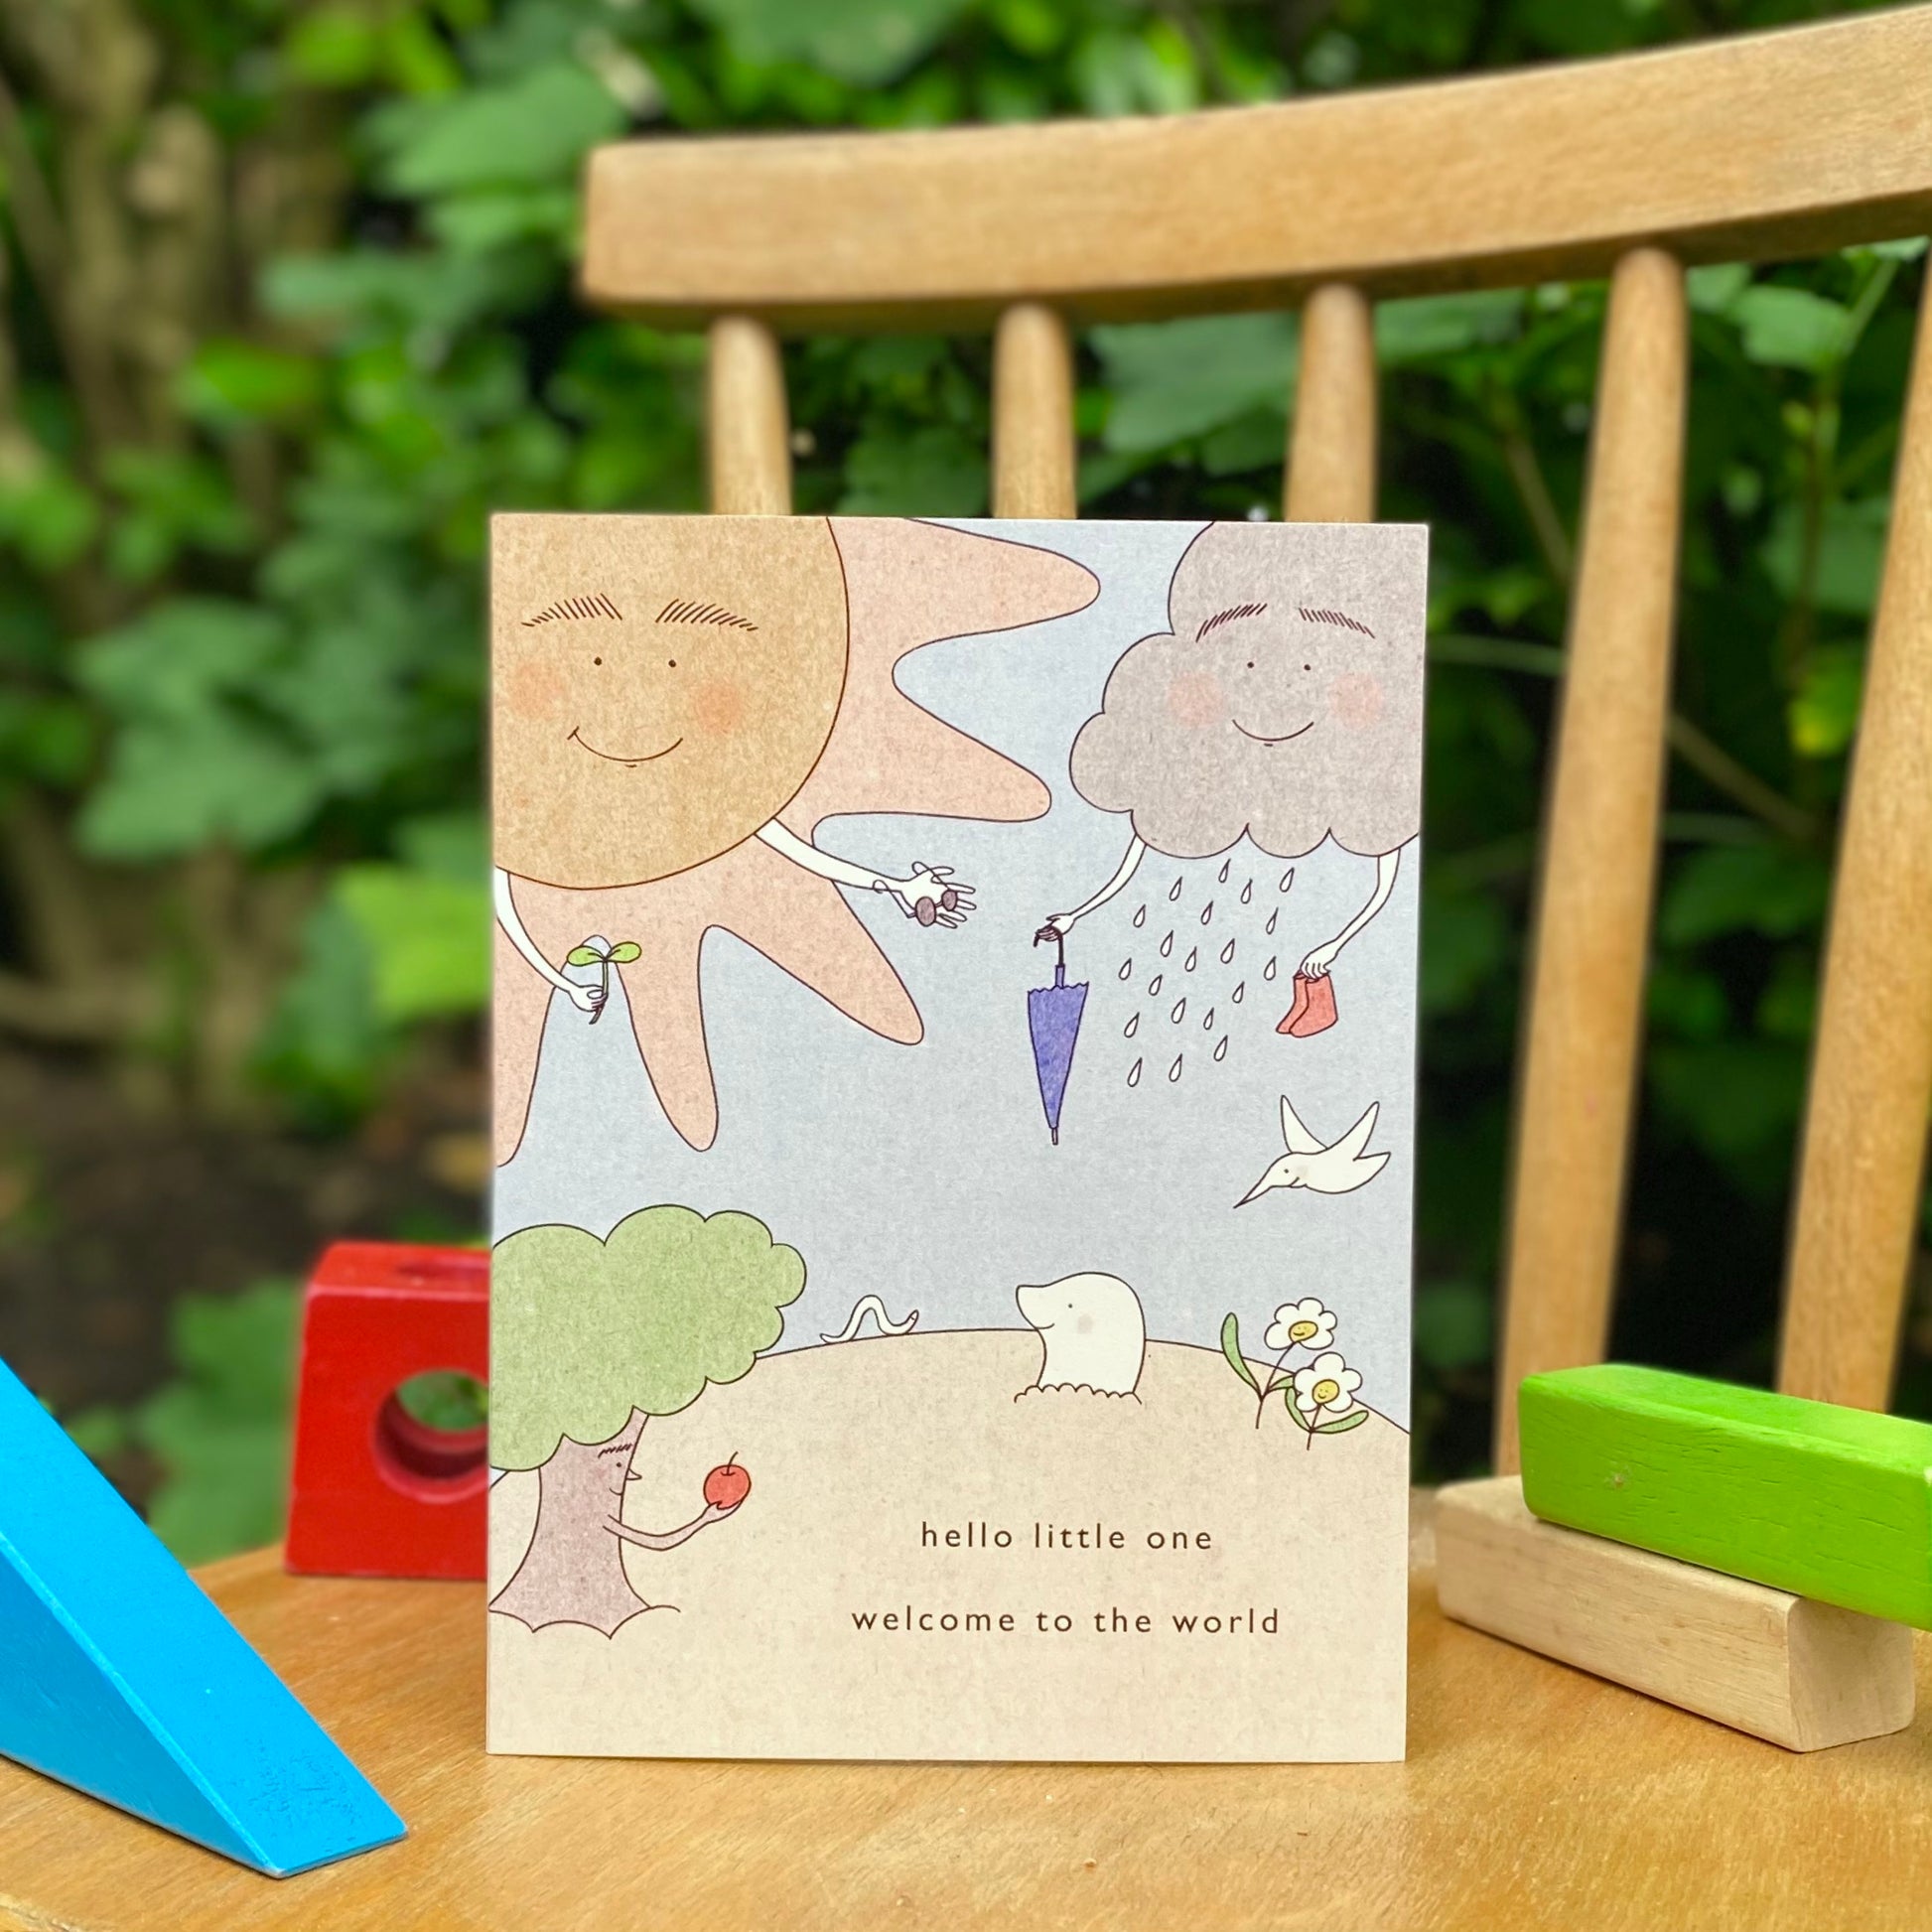 Inspiring new Born Baby Card set in which a baby mole is surrounded by nature